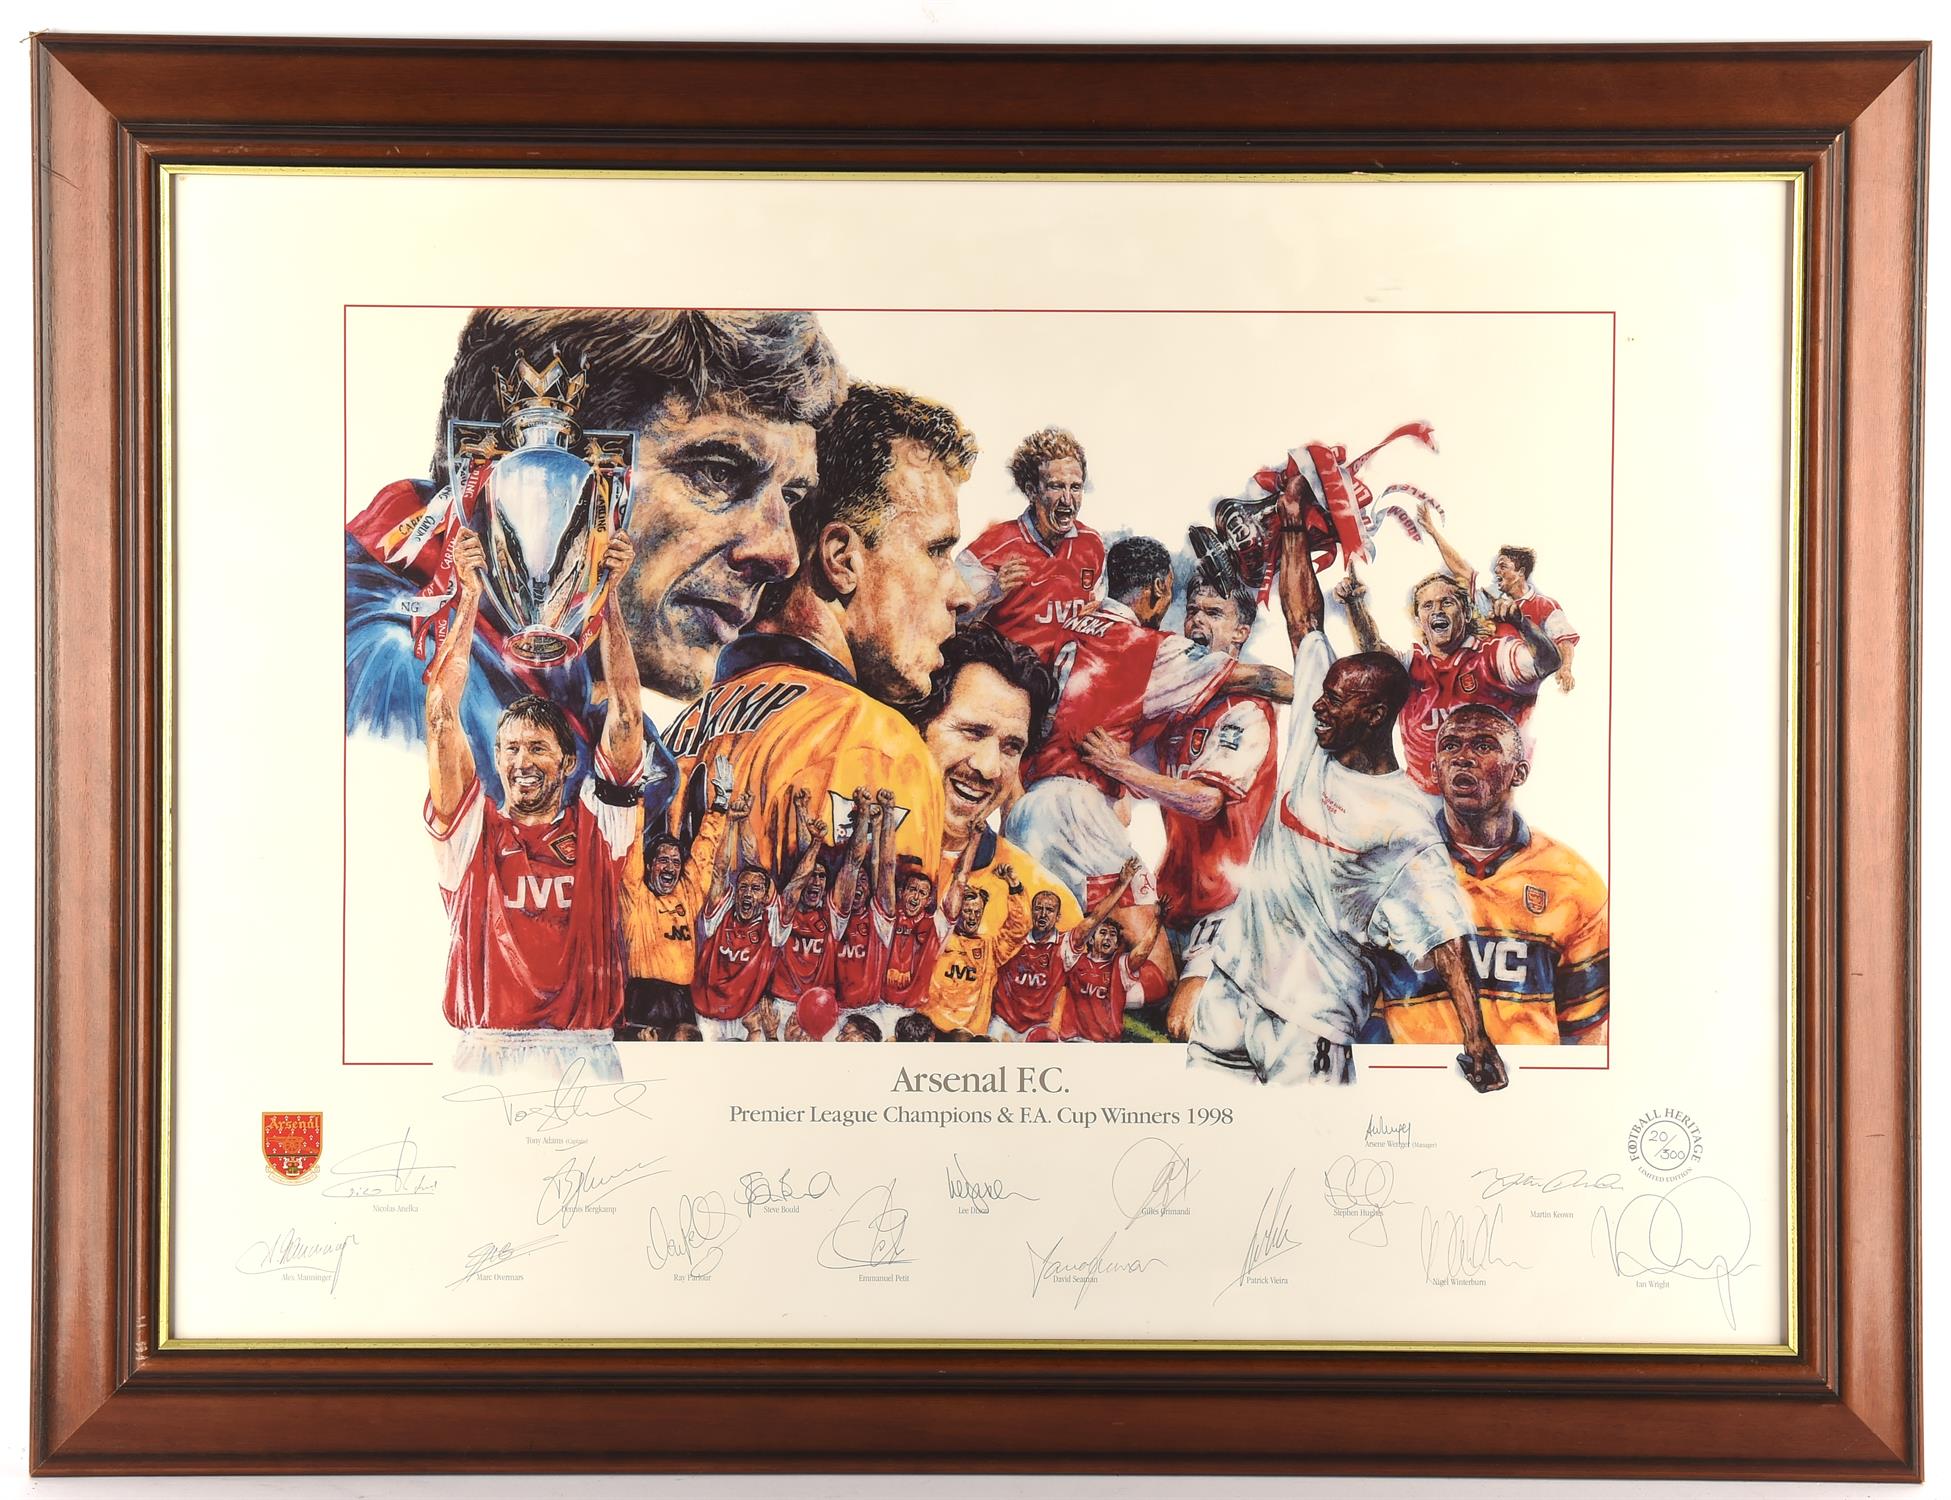 Arsenal - Team Signed Premier League Champions & F.A Cup Winners 1998 Display Art Print,